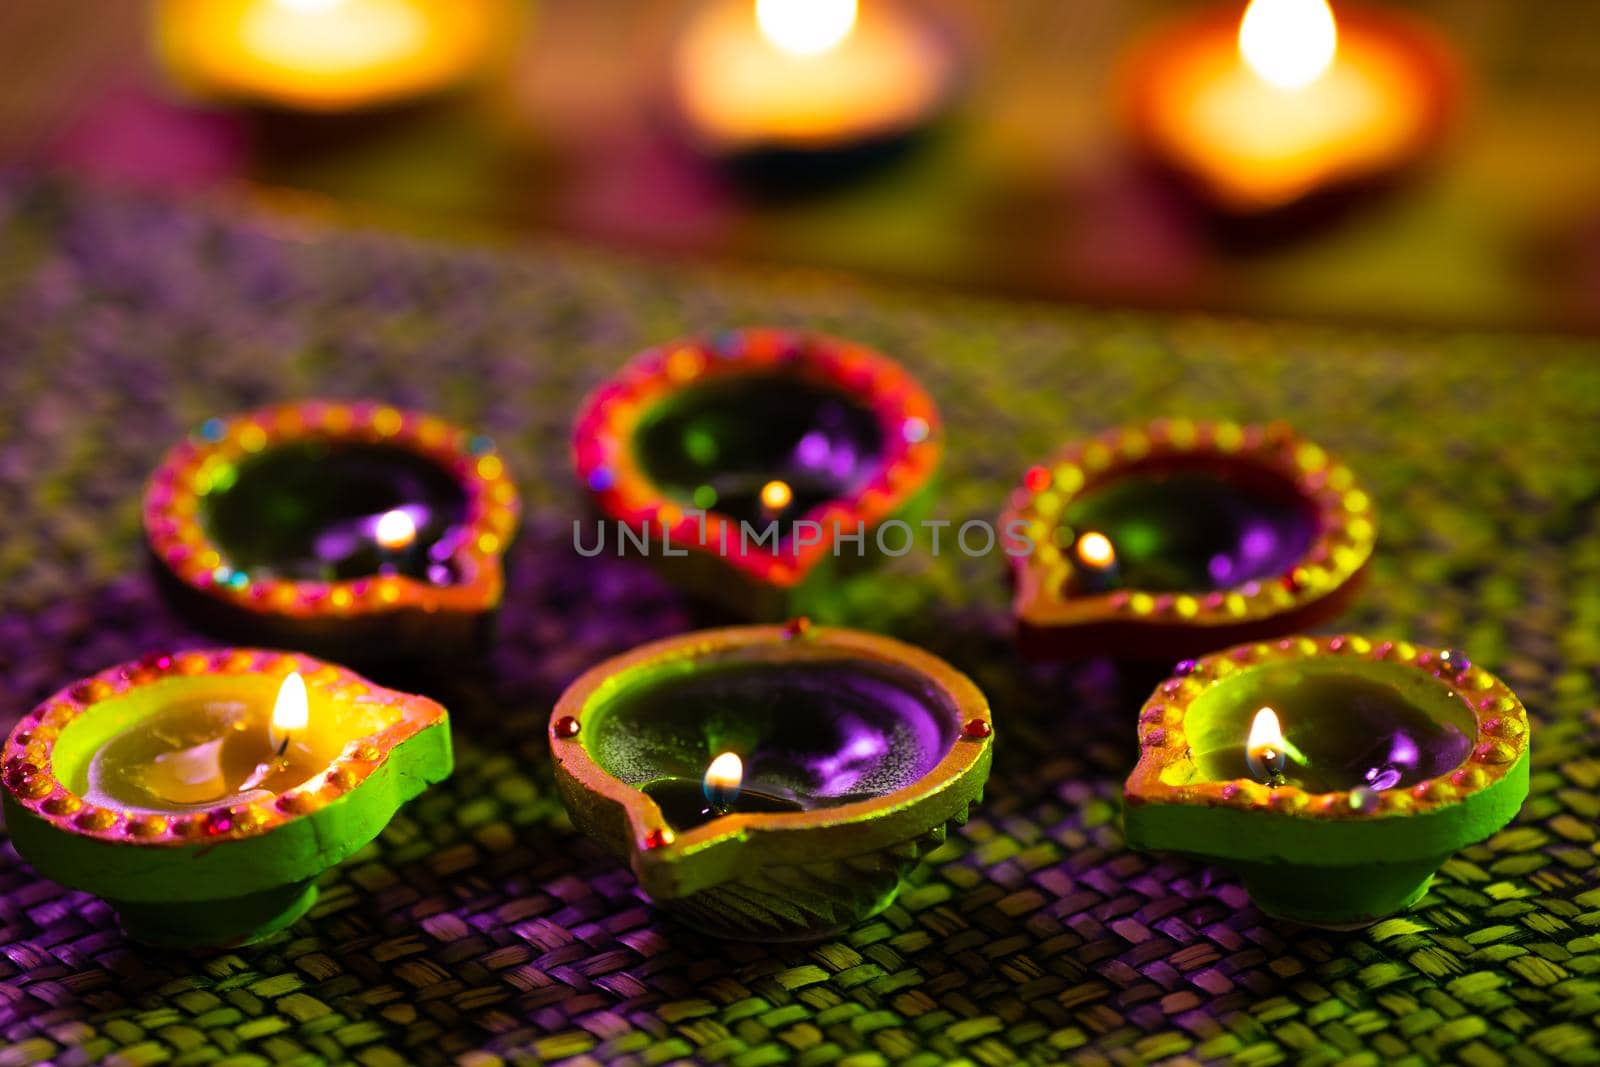 Lit candles in small decorative clay pots burning on woven table cloth. celebration, religion, tradition and ceremony concept.